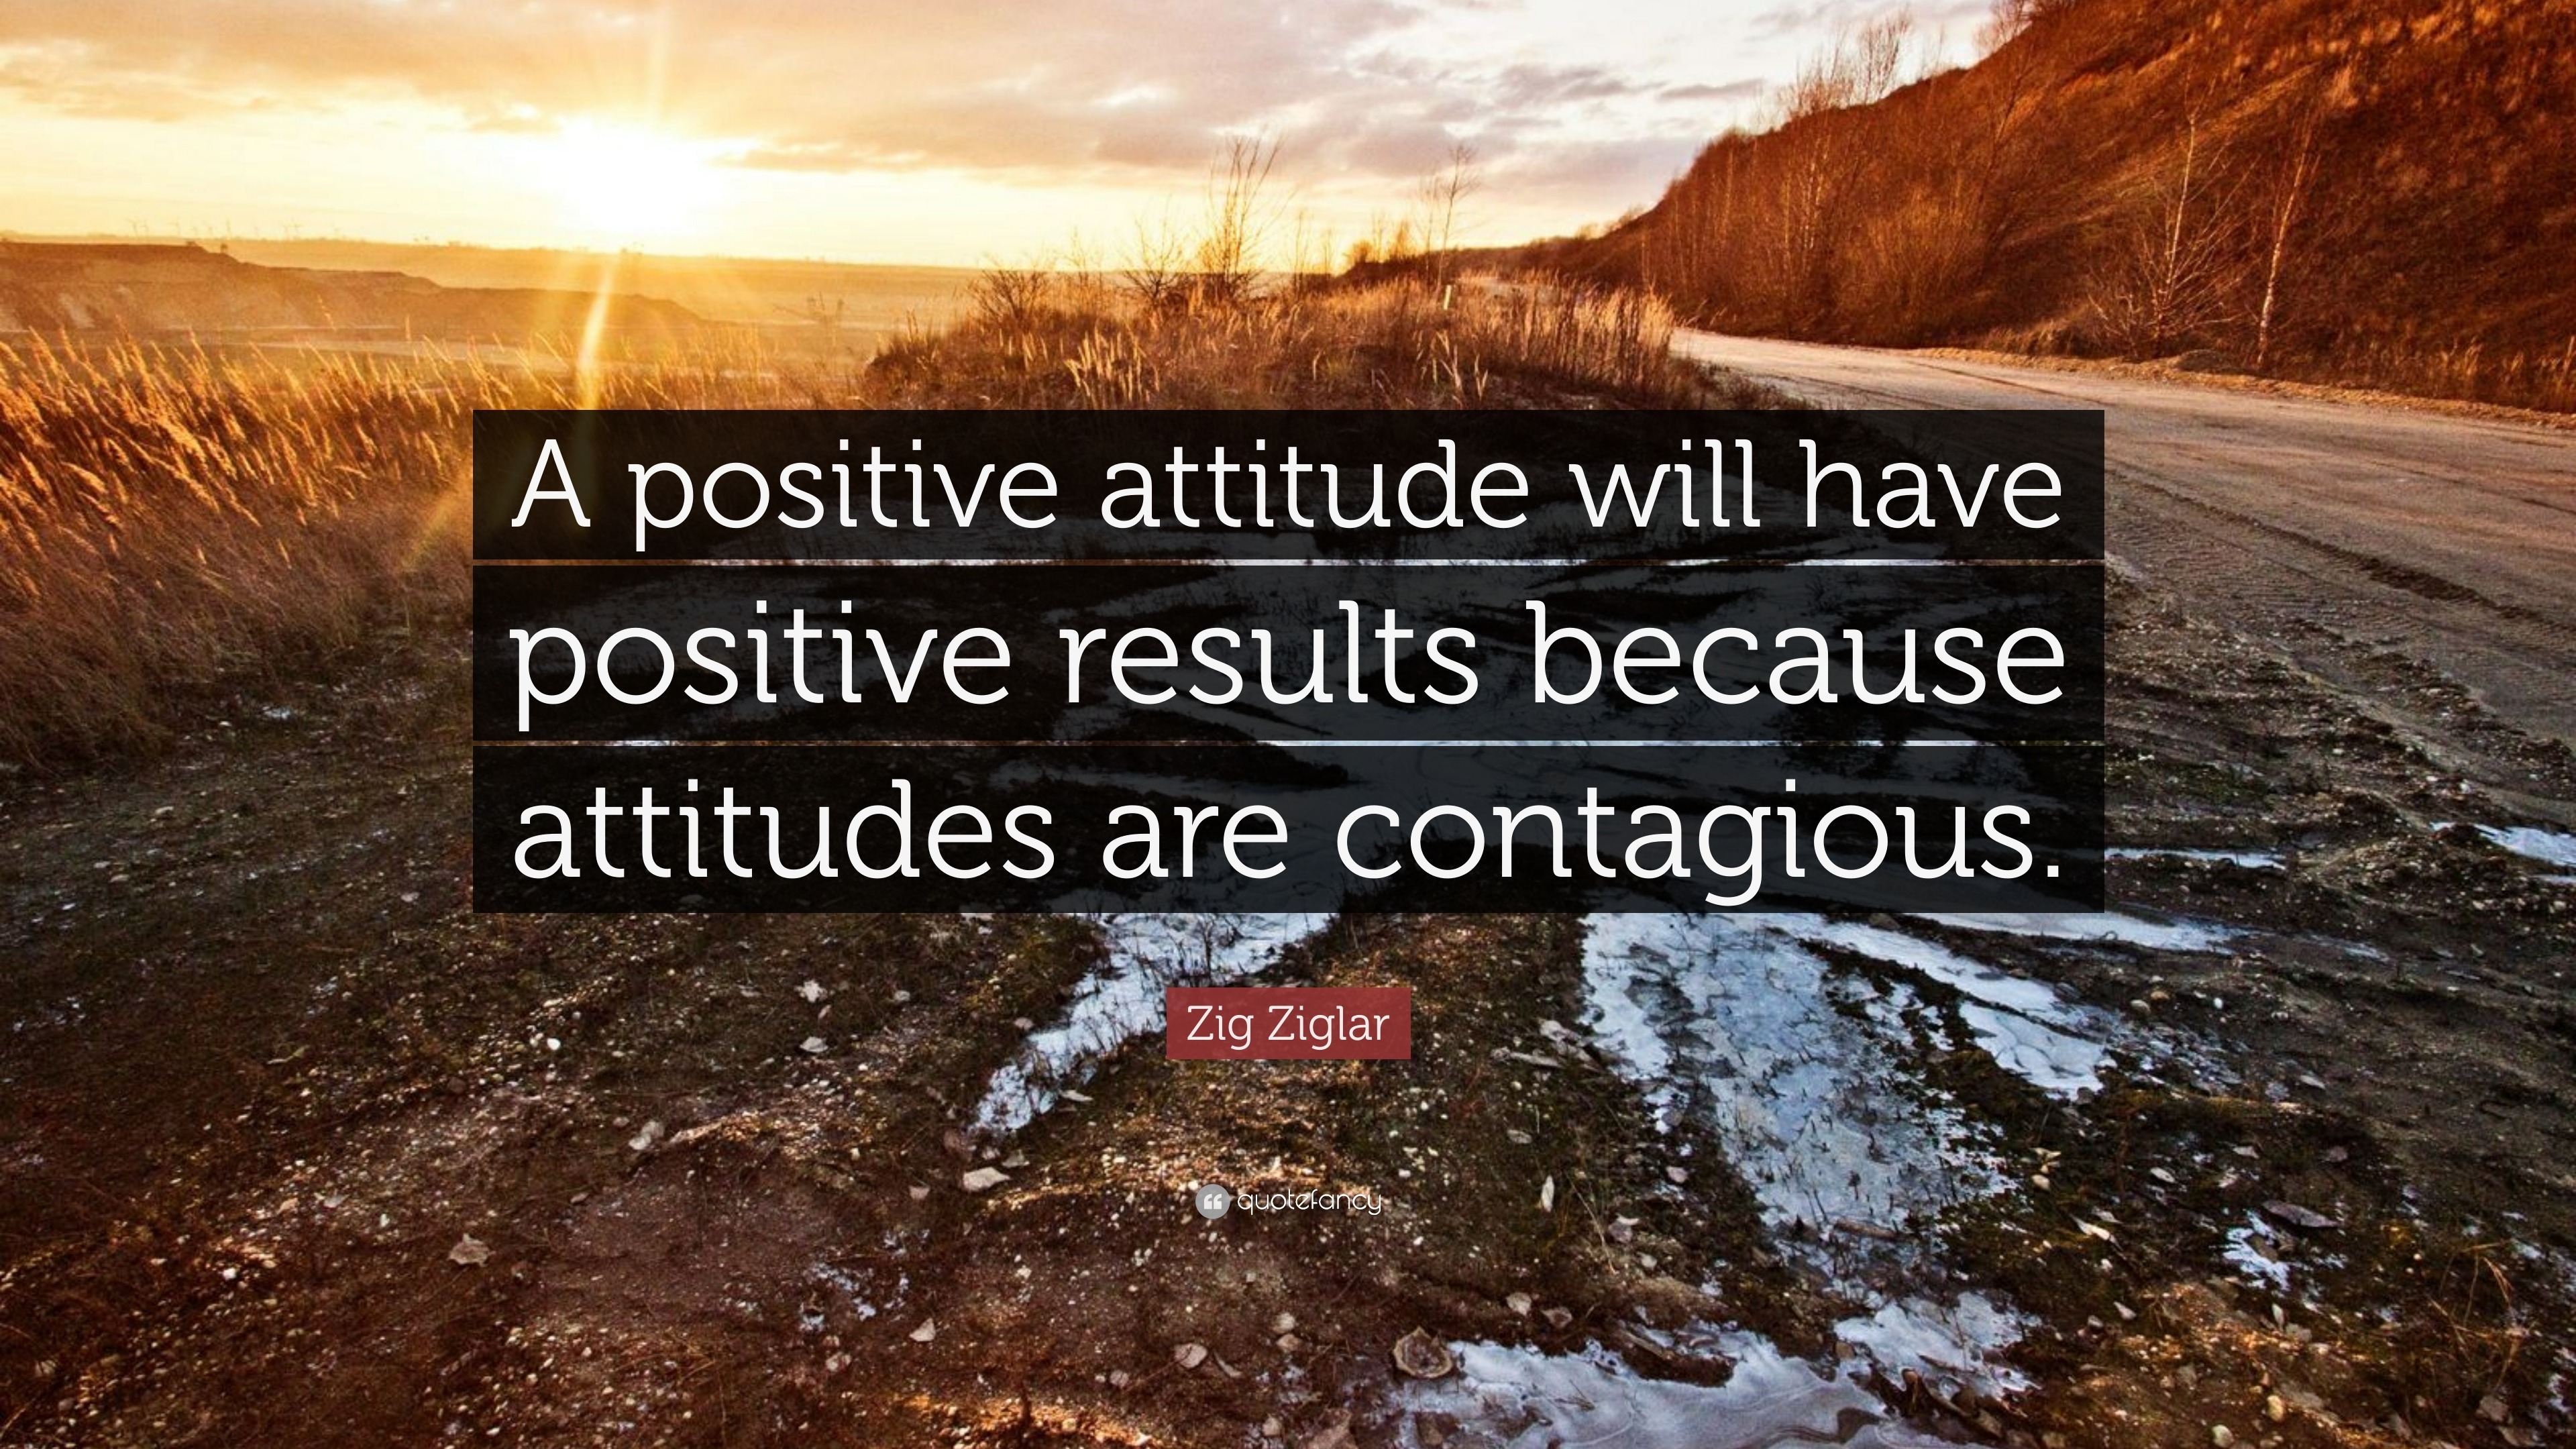 Zig Ziglar Quote: “A positive attitude will have positive results